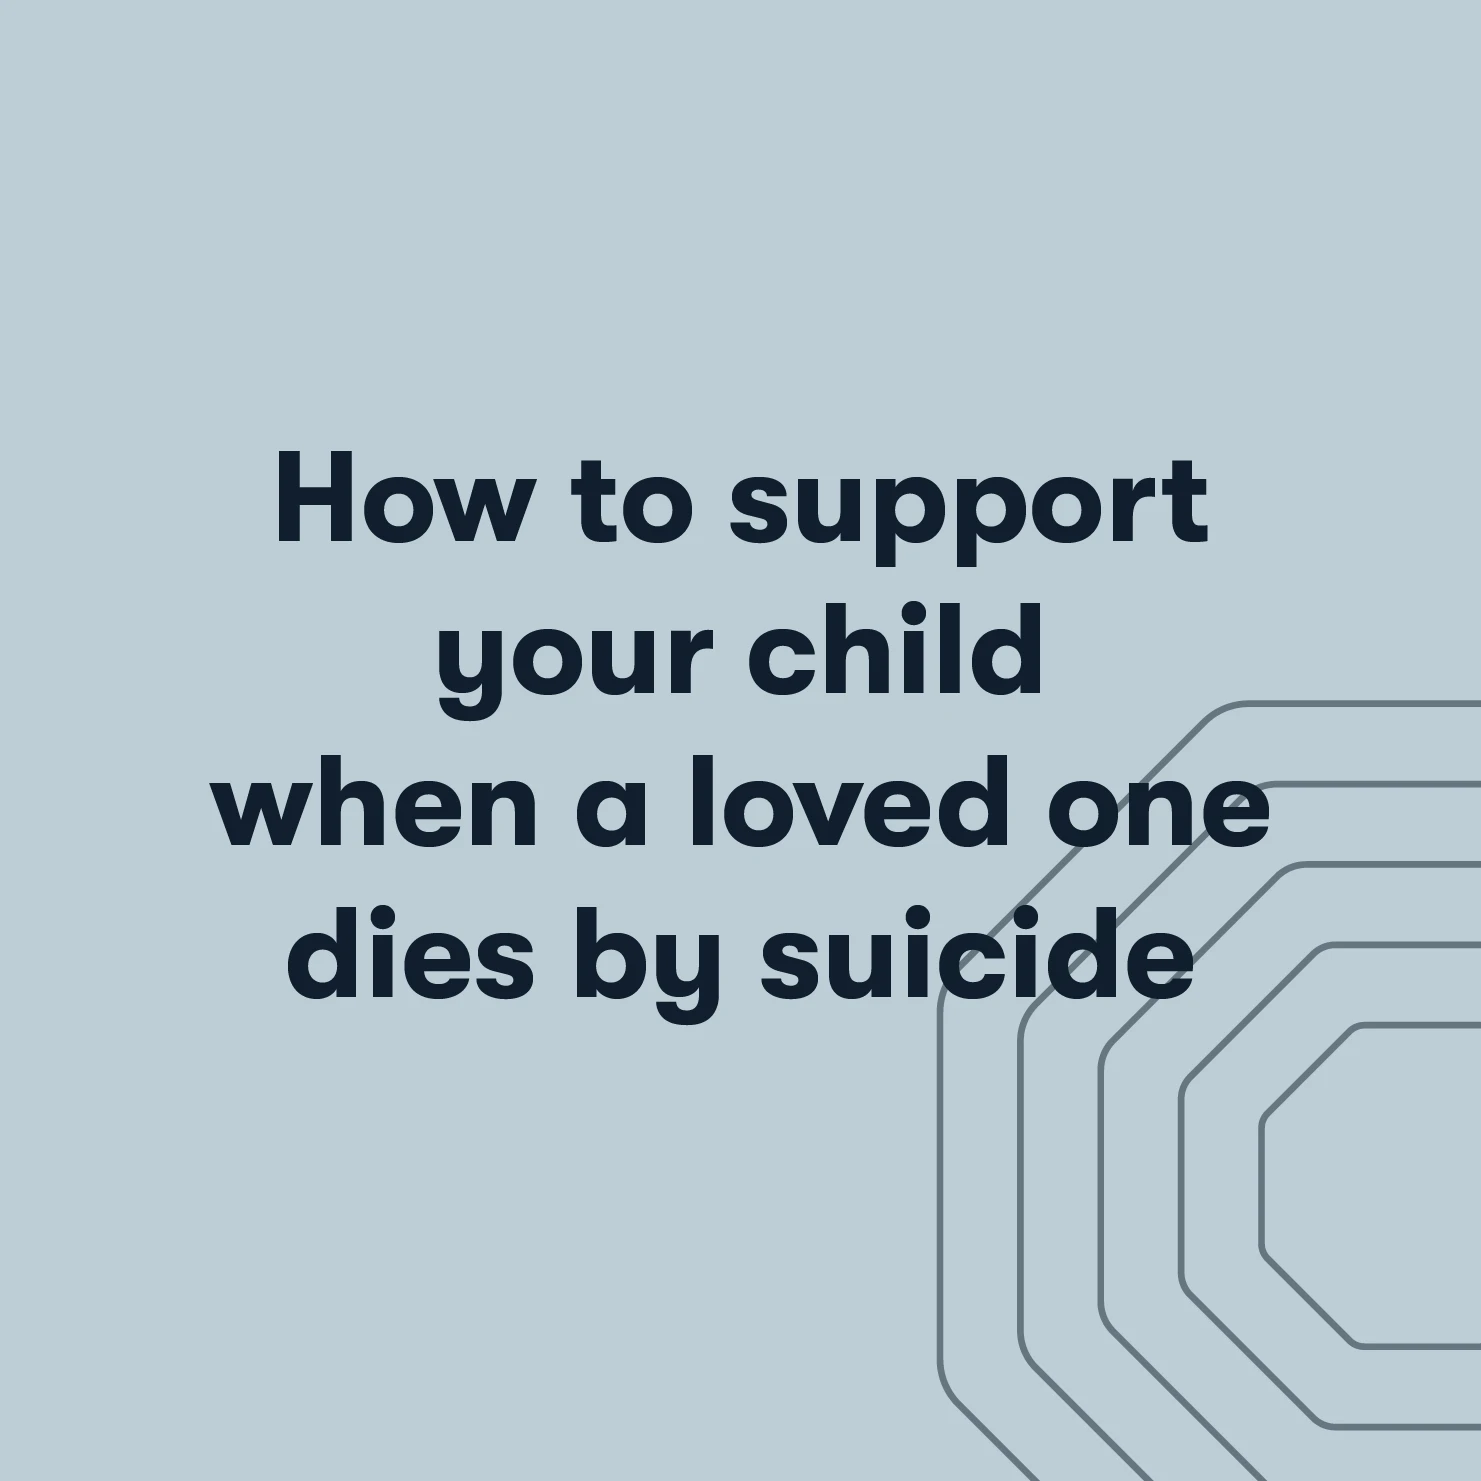 how to support your child when a loved one dies by suicide